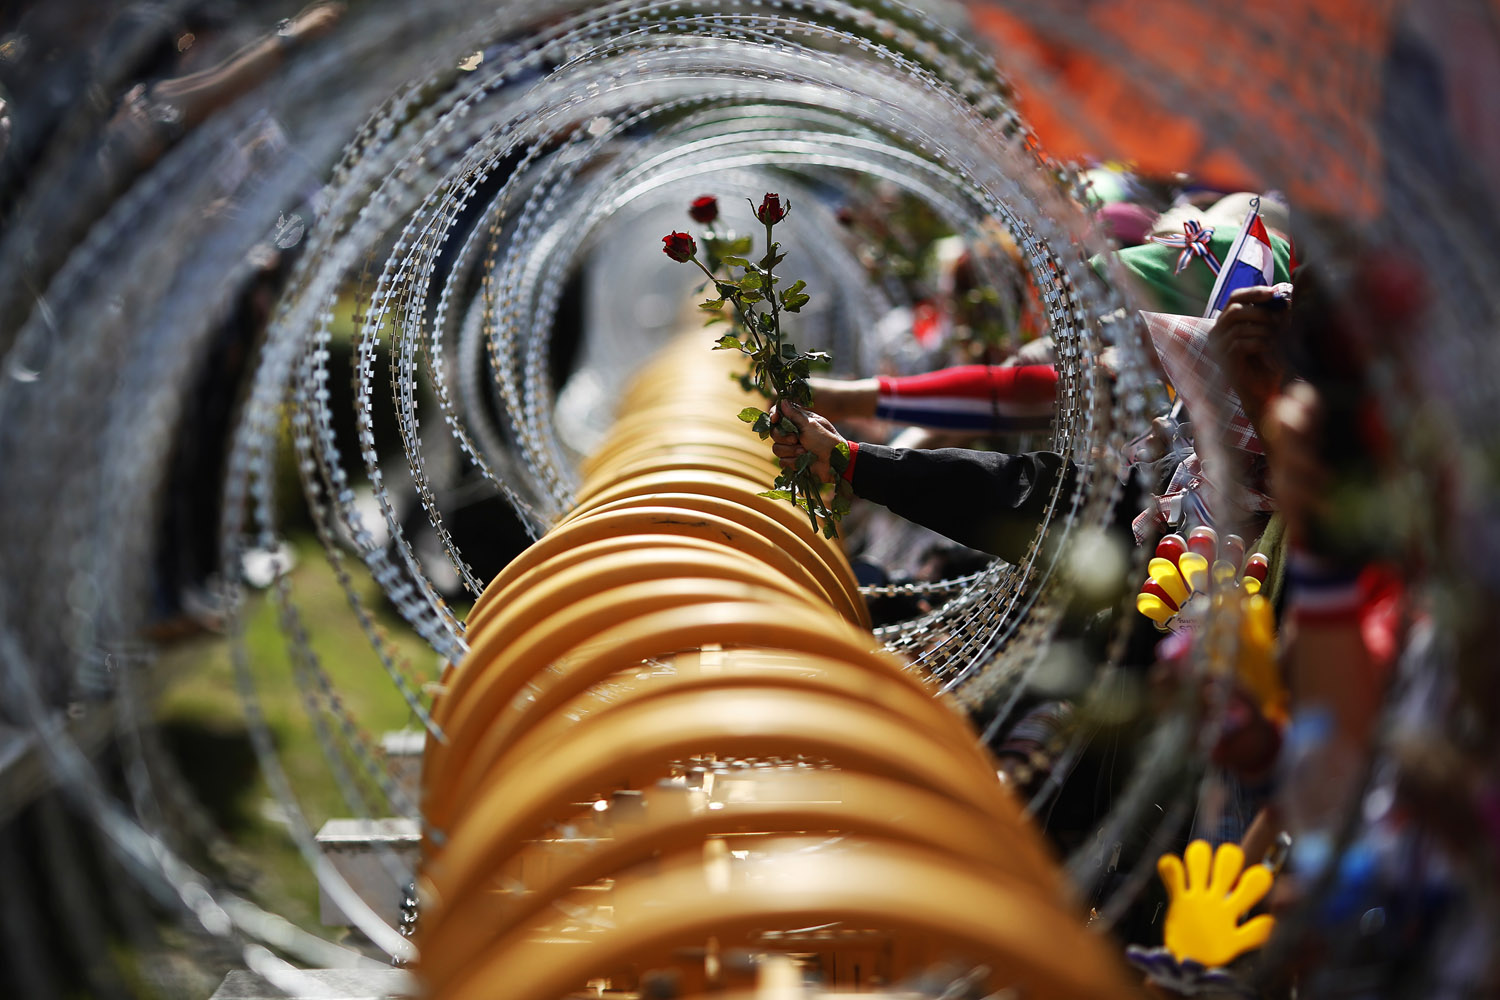 Nov. 28, 2013. Anti-government protesters give roses, through razor wire, to the security personnel guarding the Defense Ministry in Bangkok, Thailand.